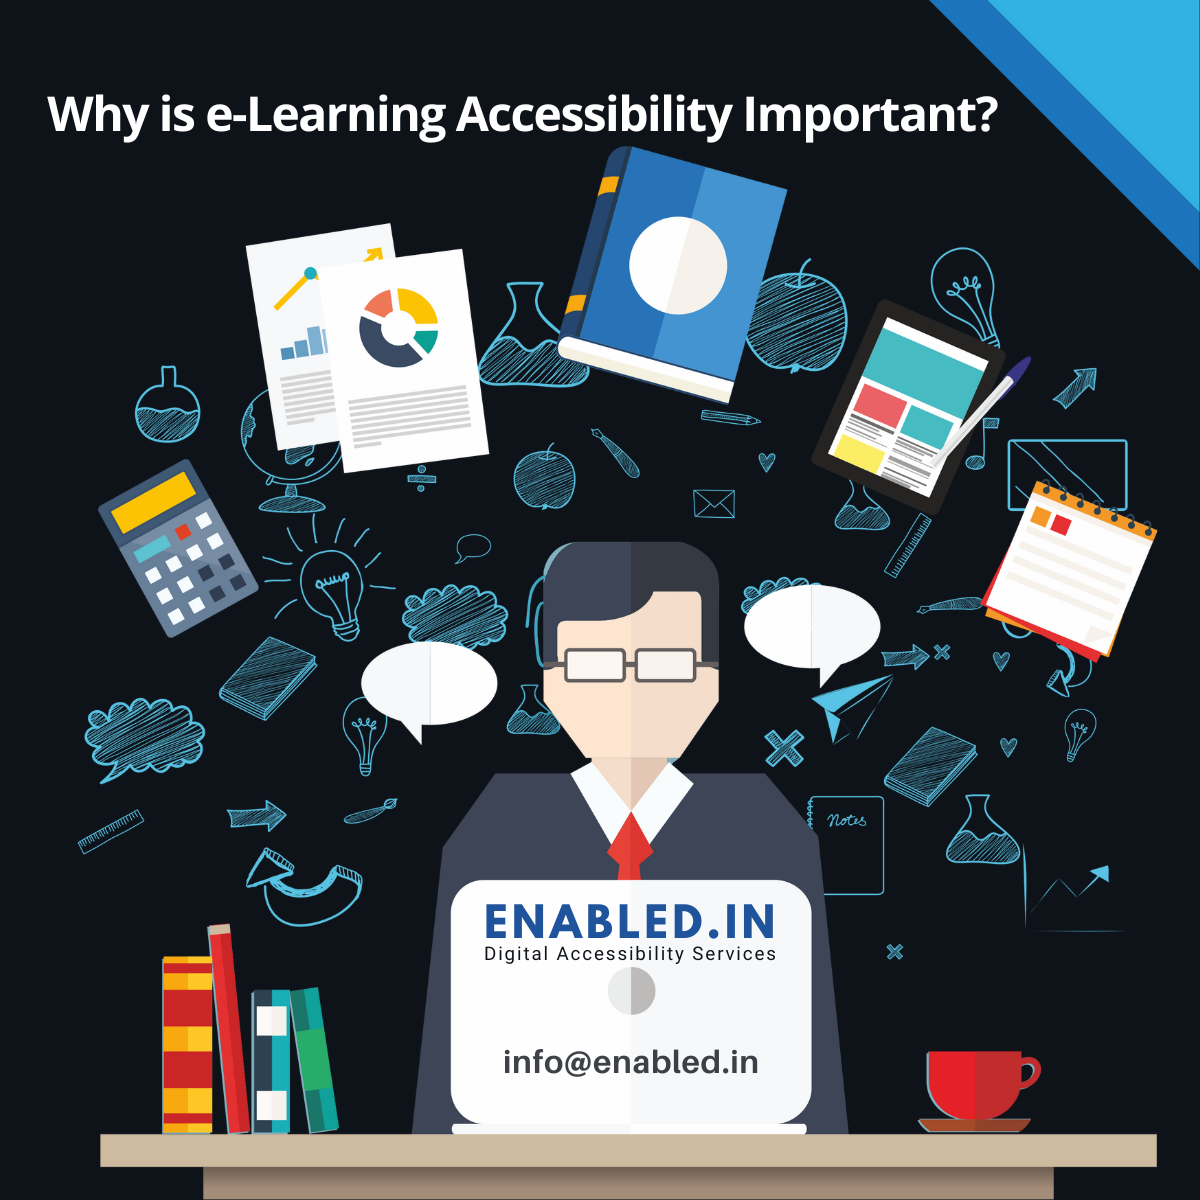 Why is e-Learning Accessibility Important?